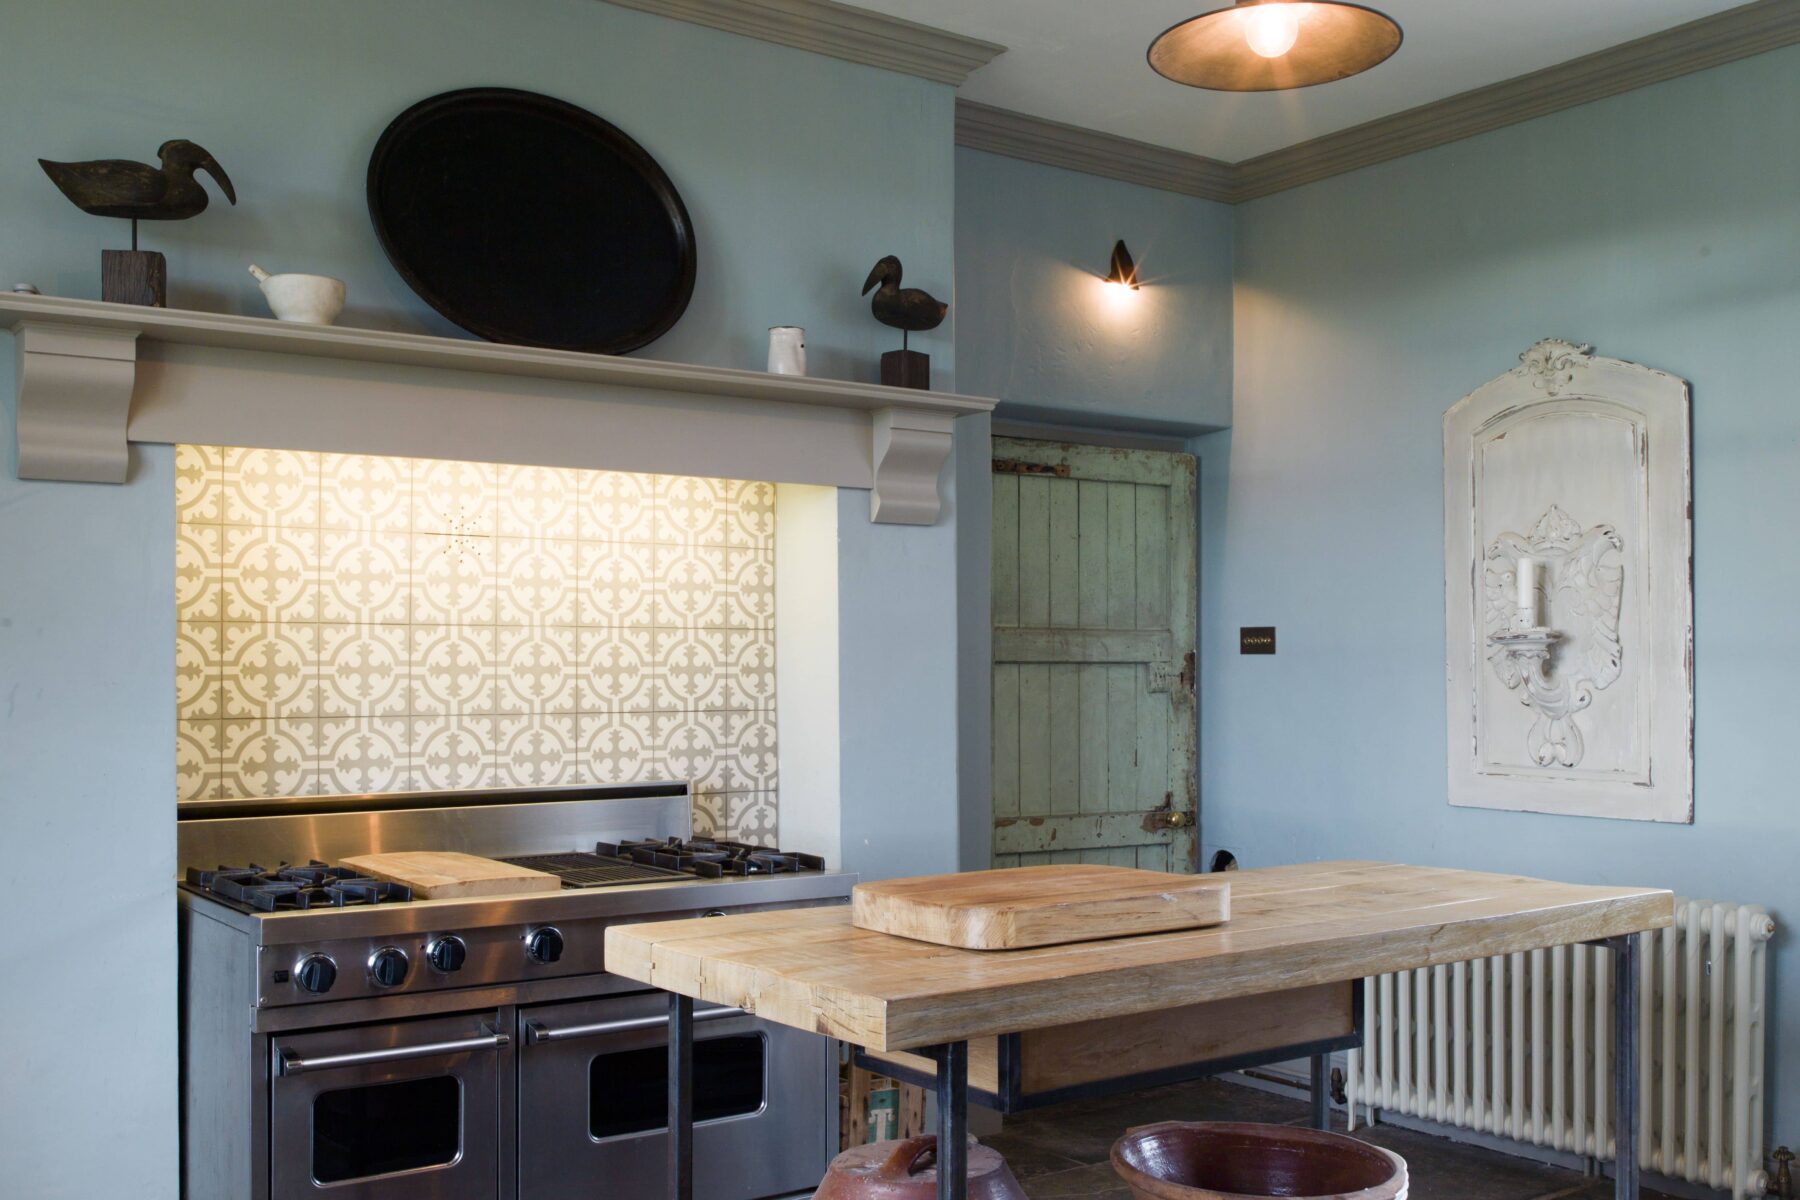 Industrial style vintage chic kitchen by Bath Bespoke for a house near Frome, Somerset